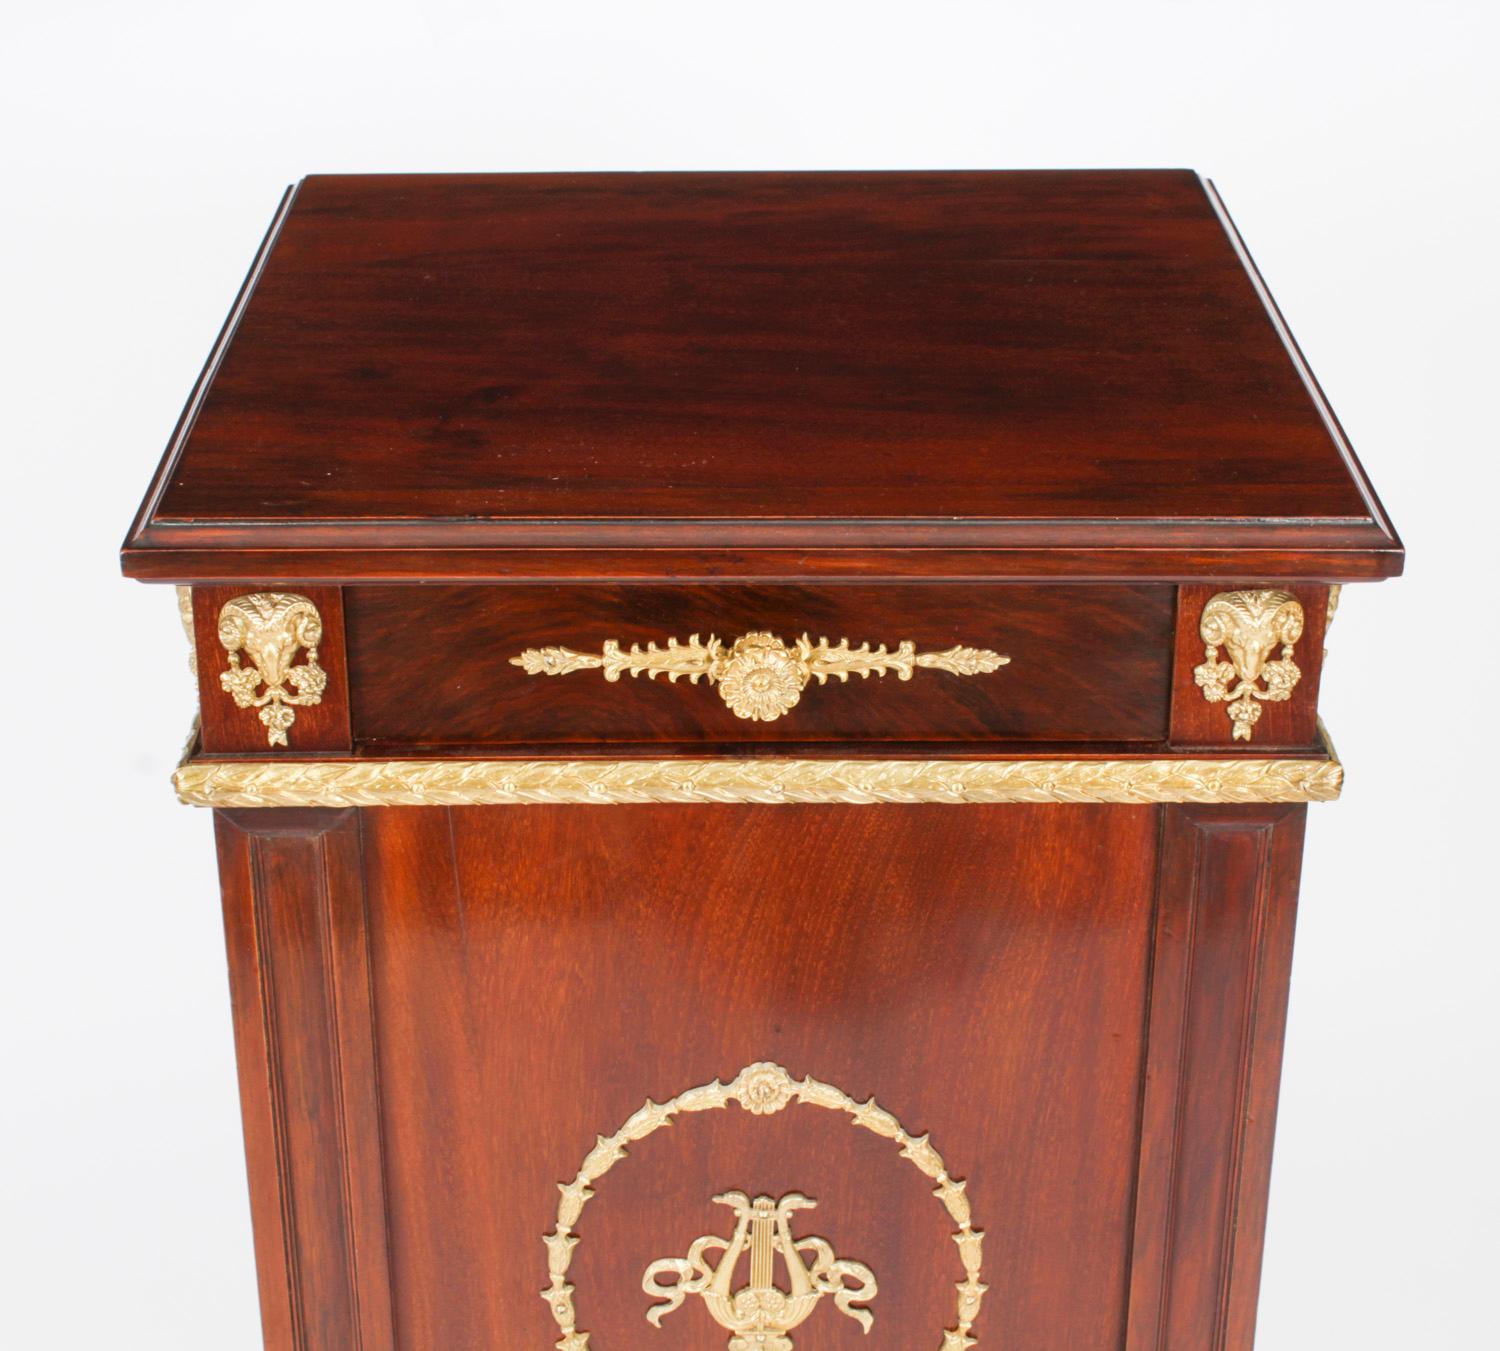 Ormolu Antique French Empire Mahogany Pedestal Bust Stand Cabinet 19th Century For Sale